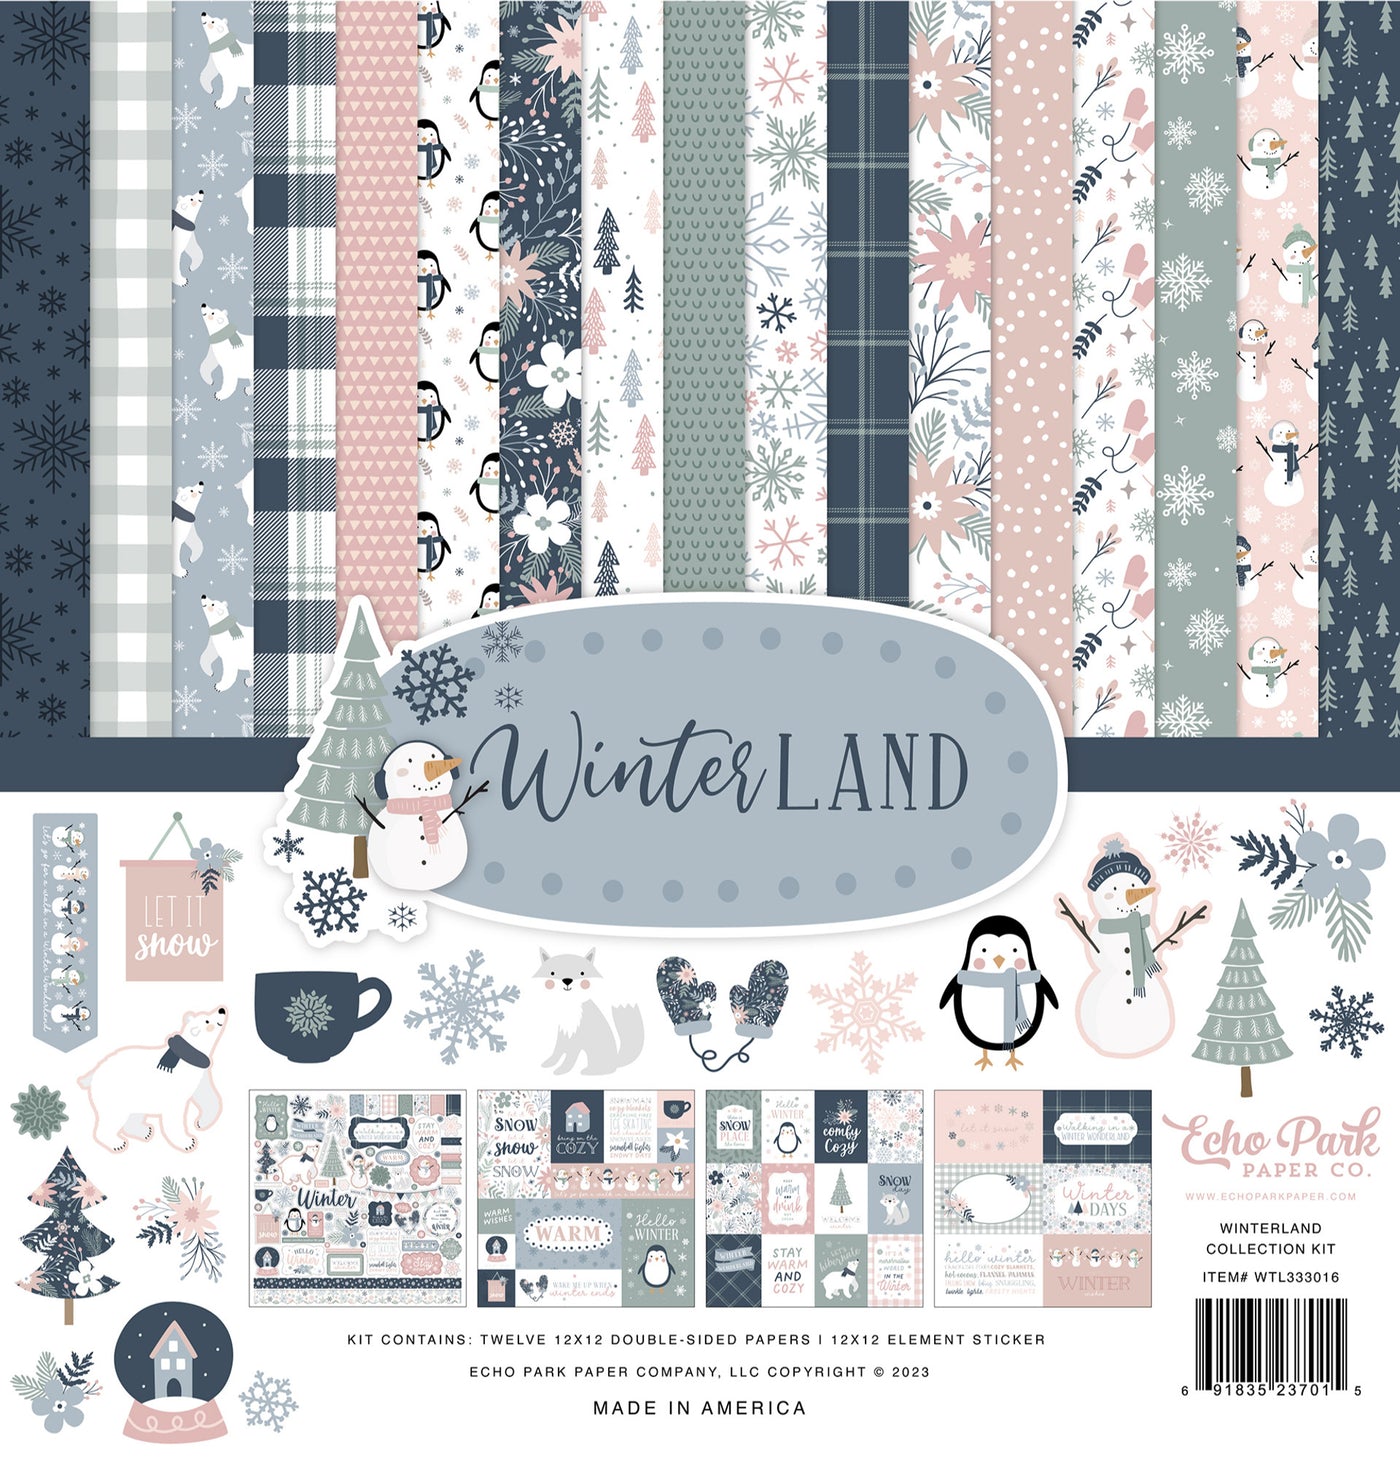 Wintery, outdoor imagery featured on 12 unique double-sided, 12x12 pages for cozy seasonal paper crafting. Each kit has a 12x12 sheet of matching sticker elements.